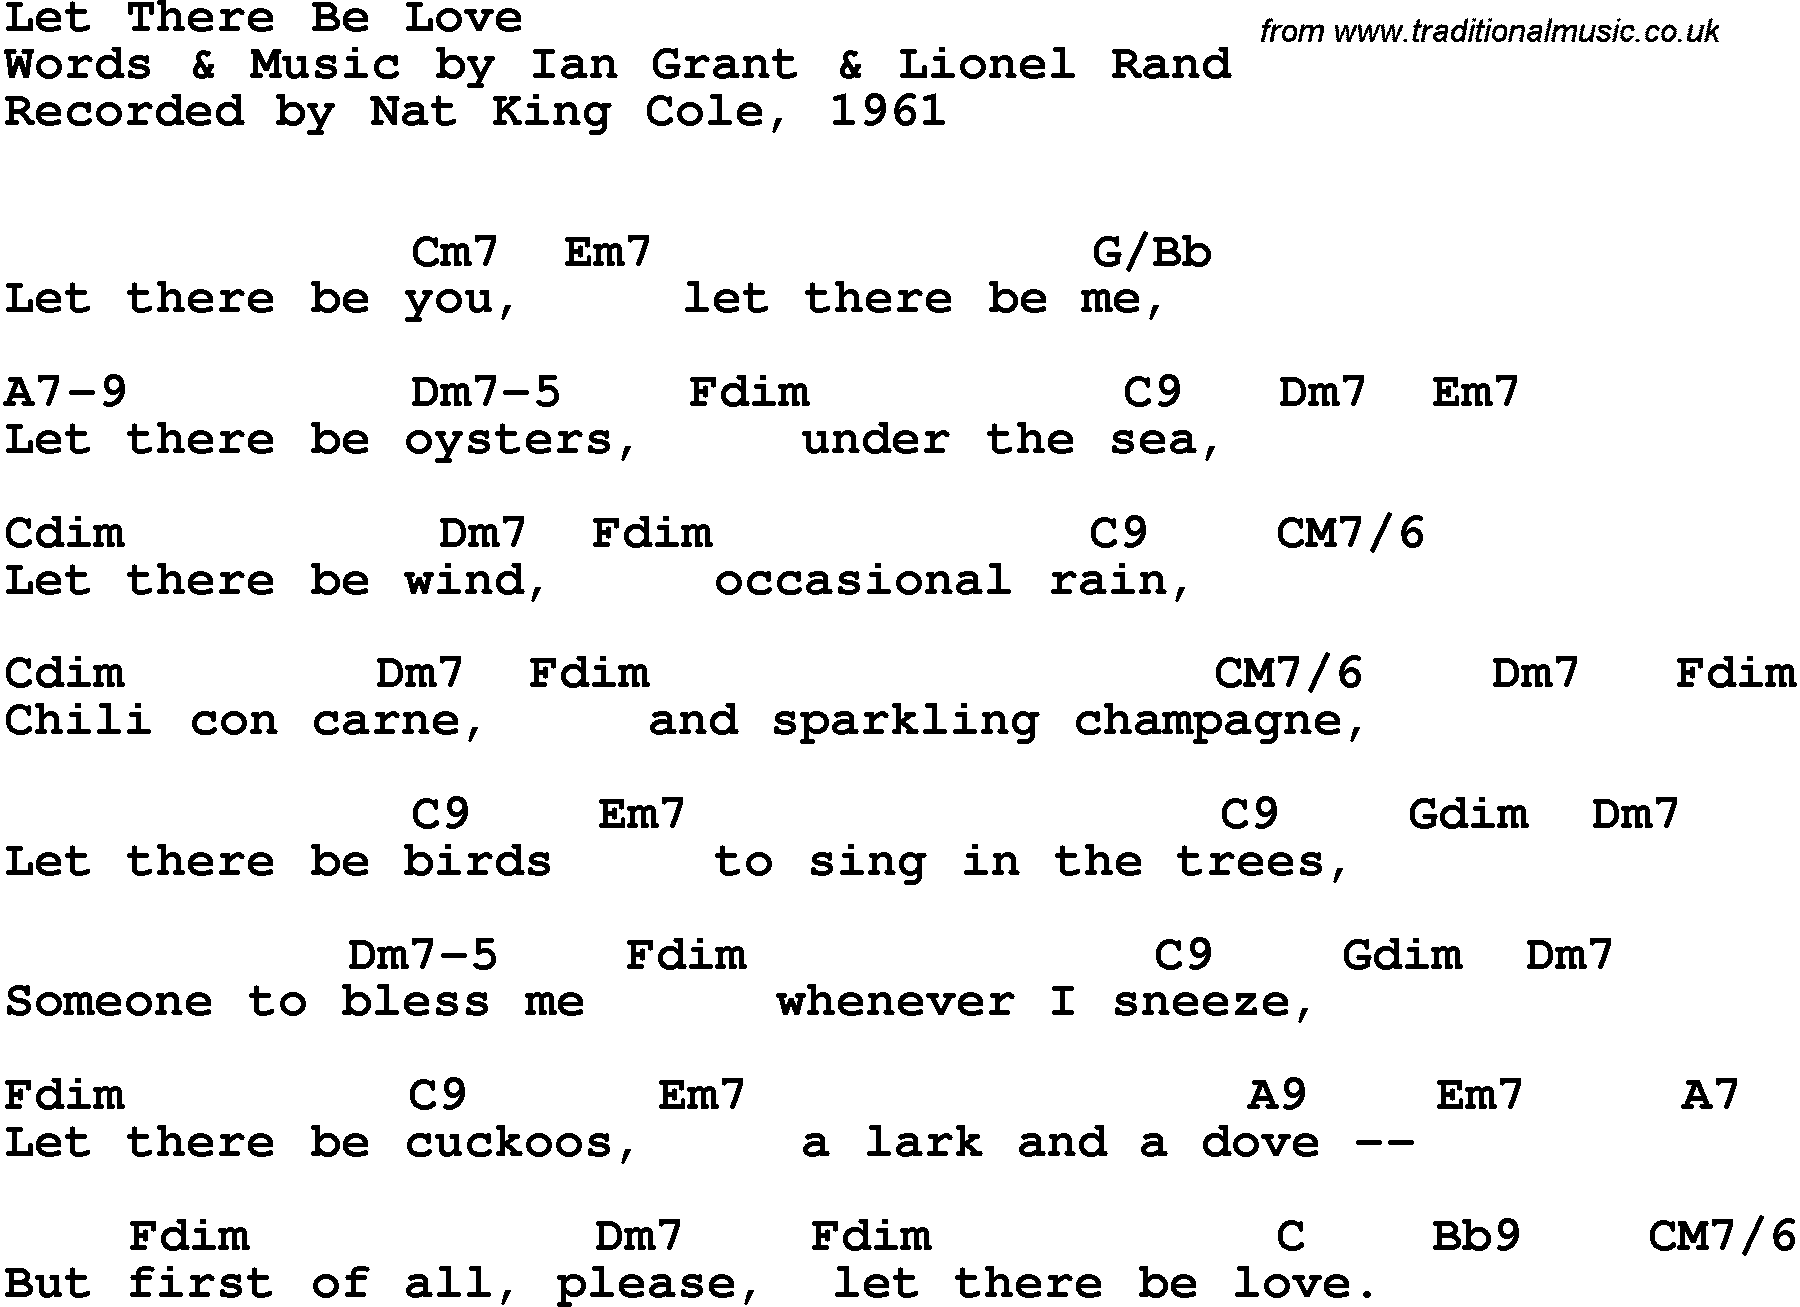 Song Lyrics with guitar chords for Let There Be Love - Nat King Cole, 1961